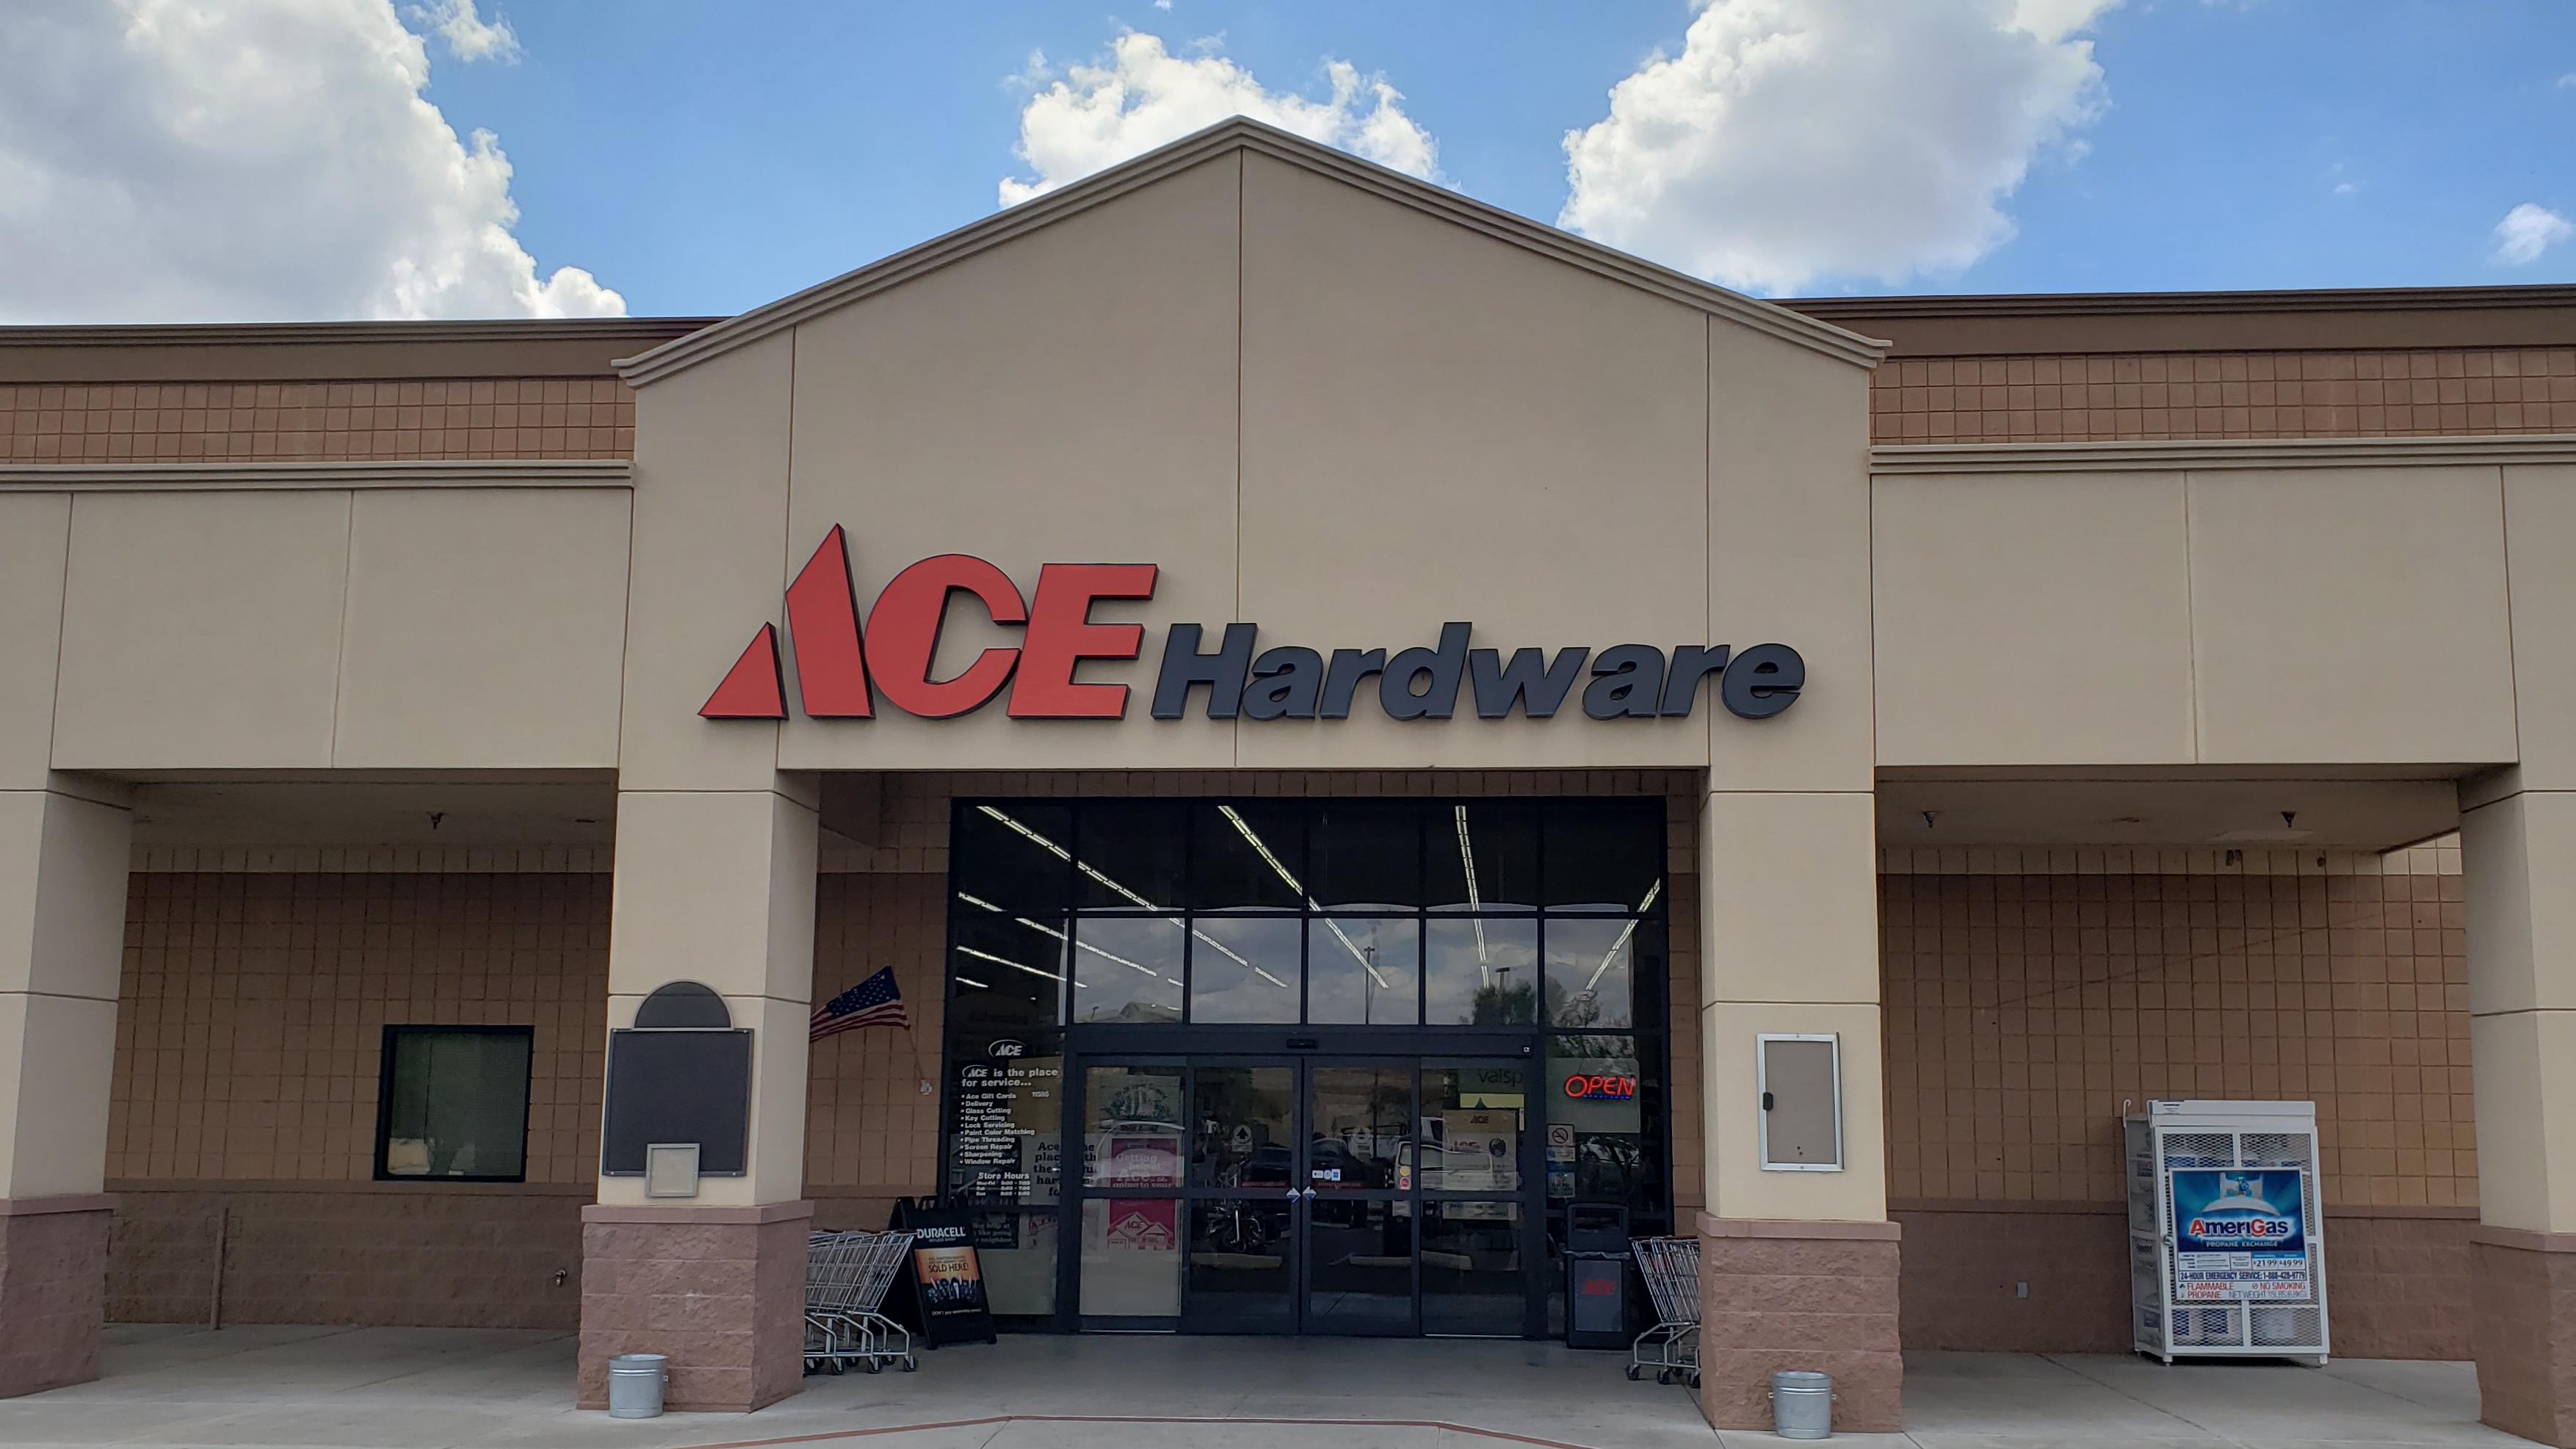 Continental Ace Hardware/Hardware Stores                                                                                                                                                                                         